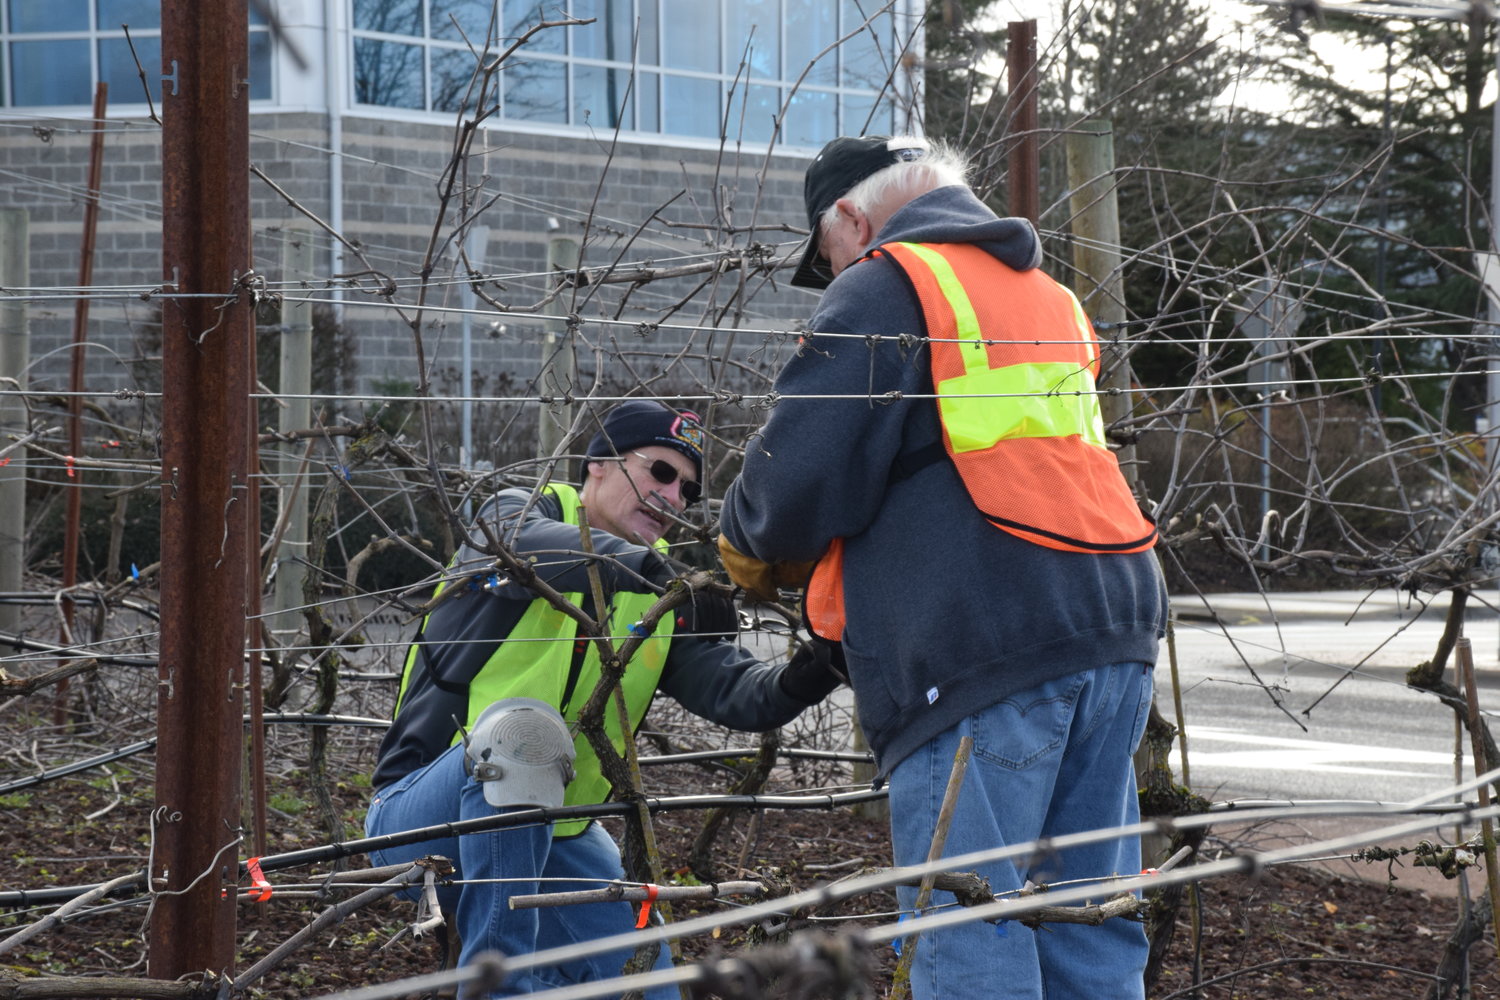 Ridgefield City Councilor Rob Aichele, left, and city resident Clyde Burkle prune a grape vine at the 56th Place and Pioneer Street roundabout on Feb. 5.